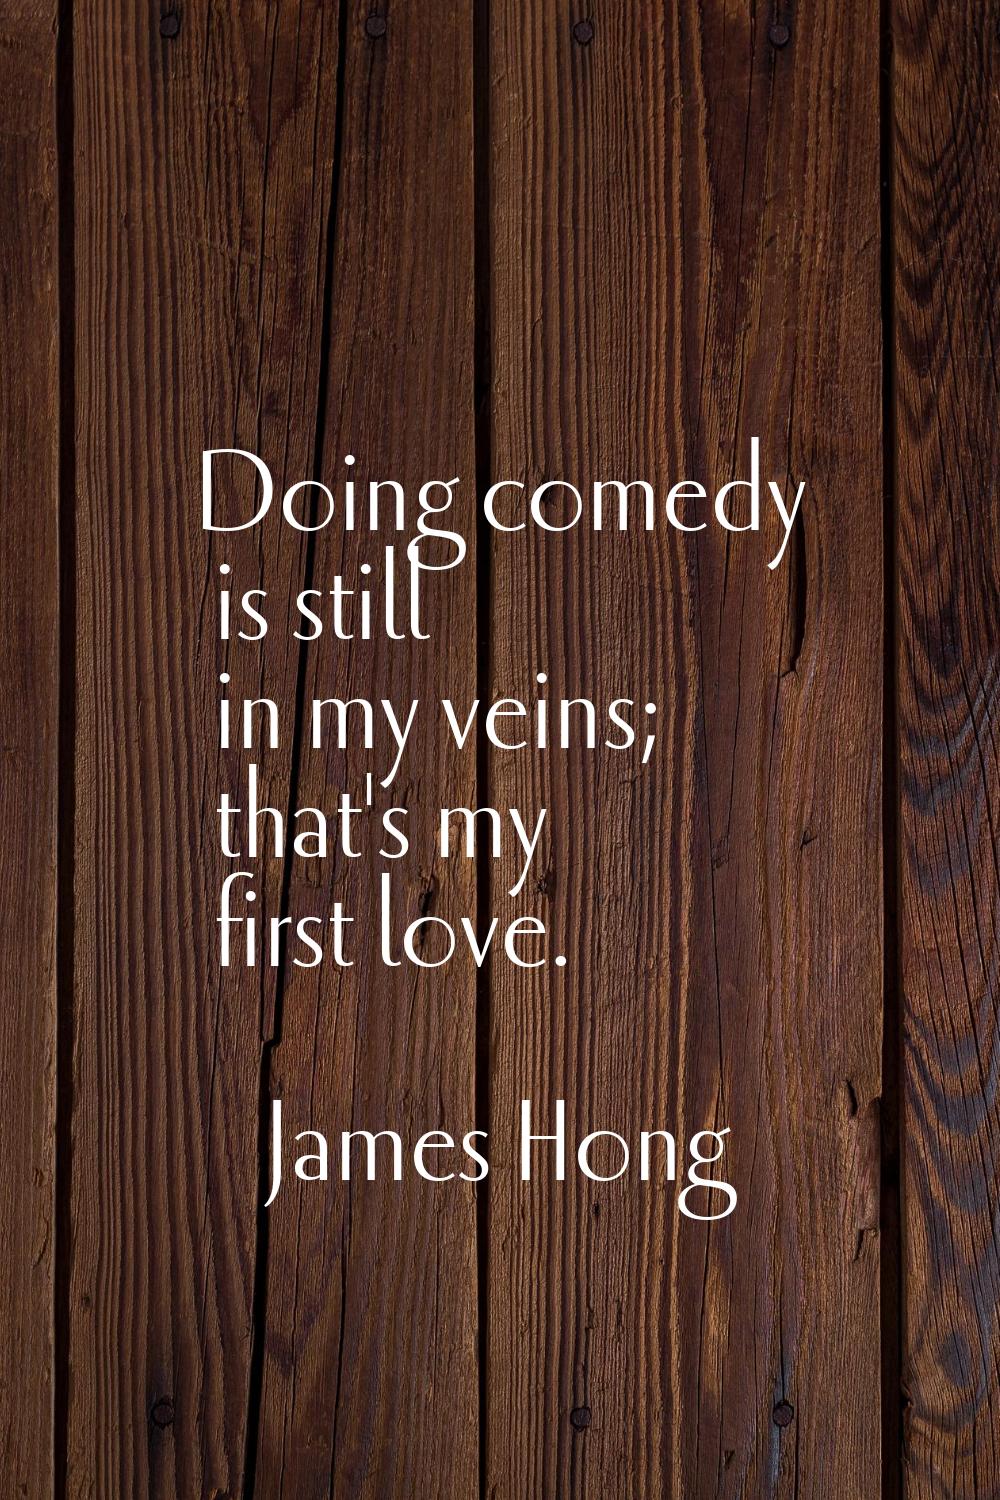 Doing comedy is still in my veins; that's my first love.